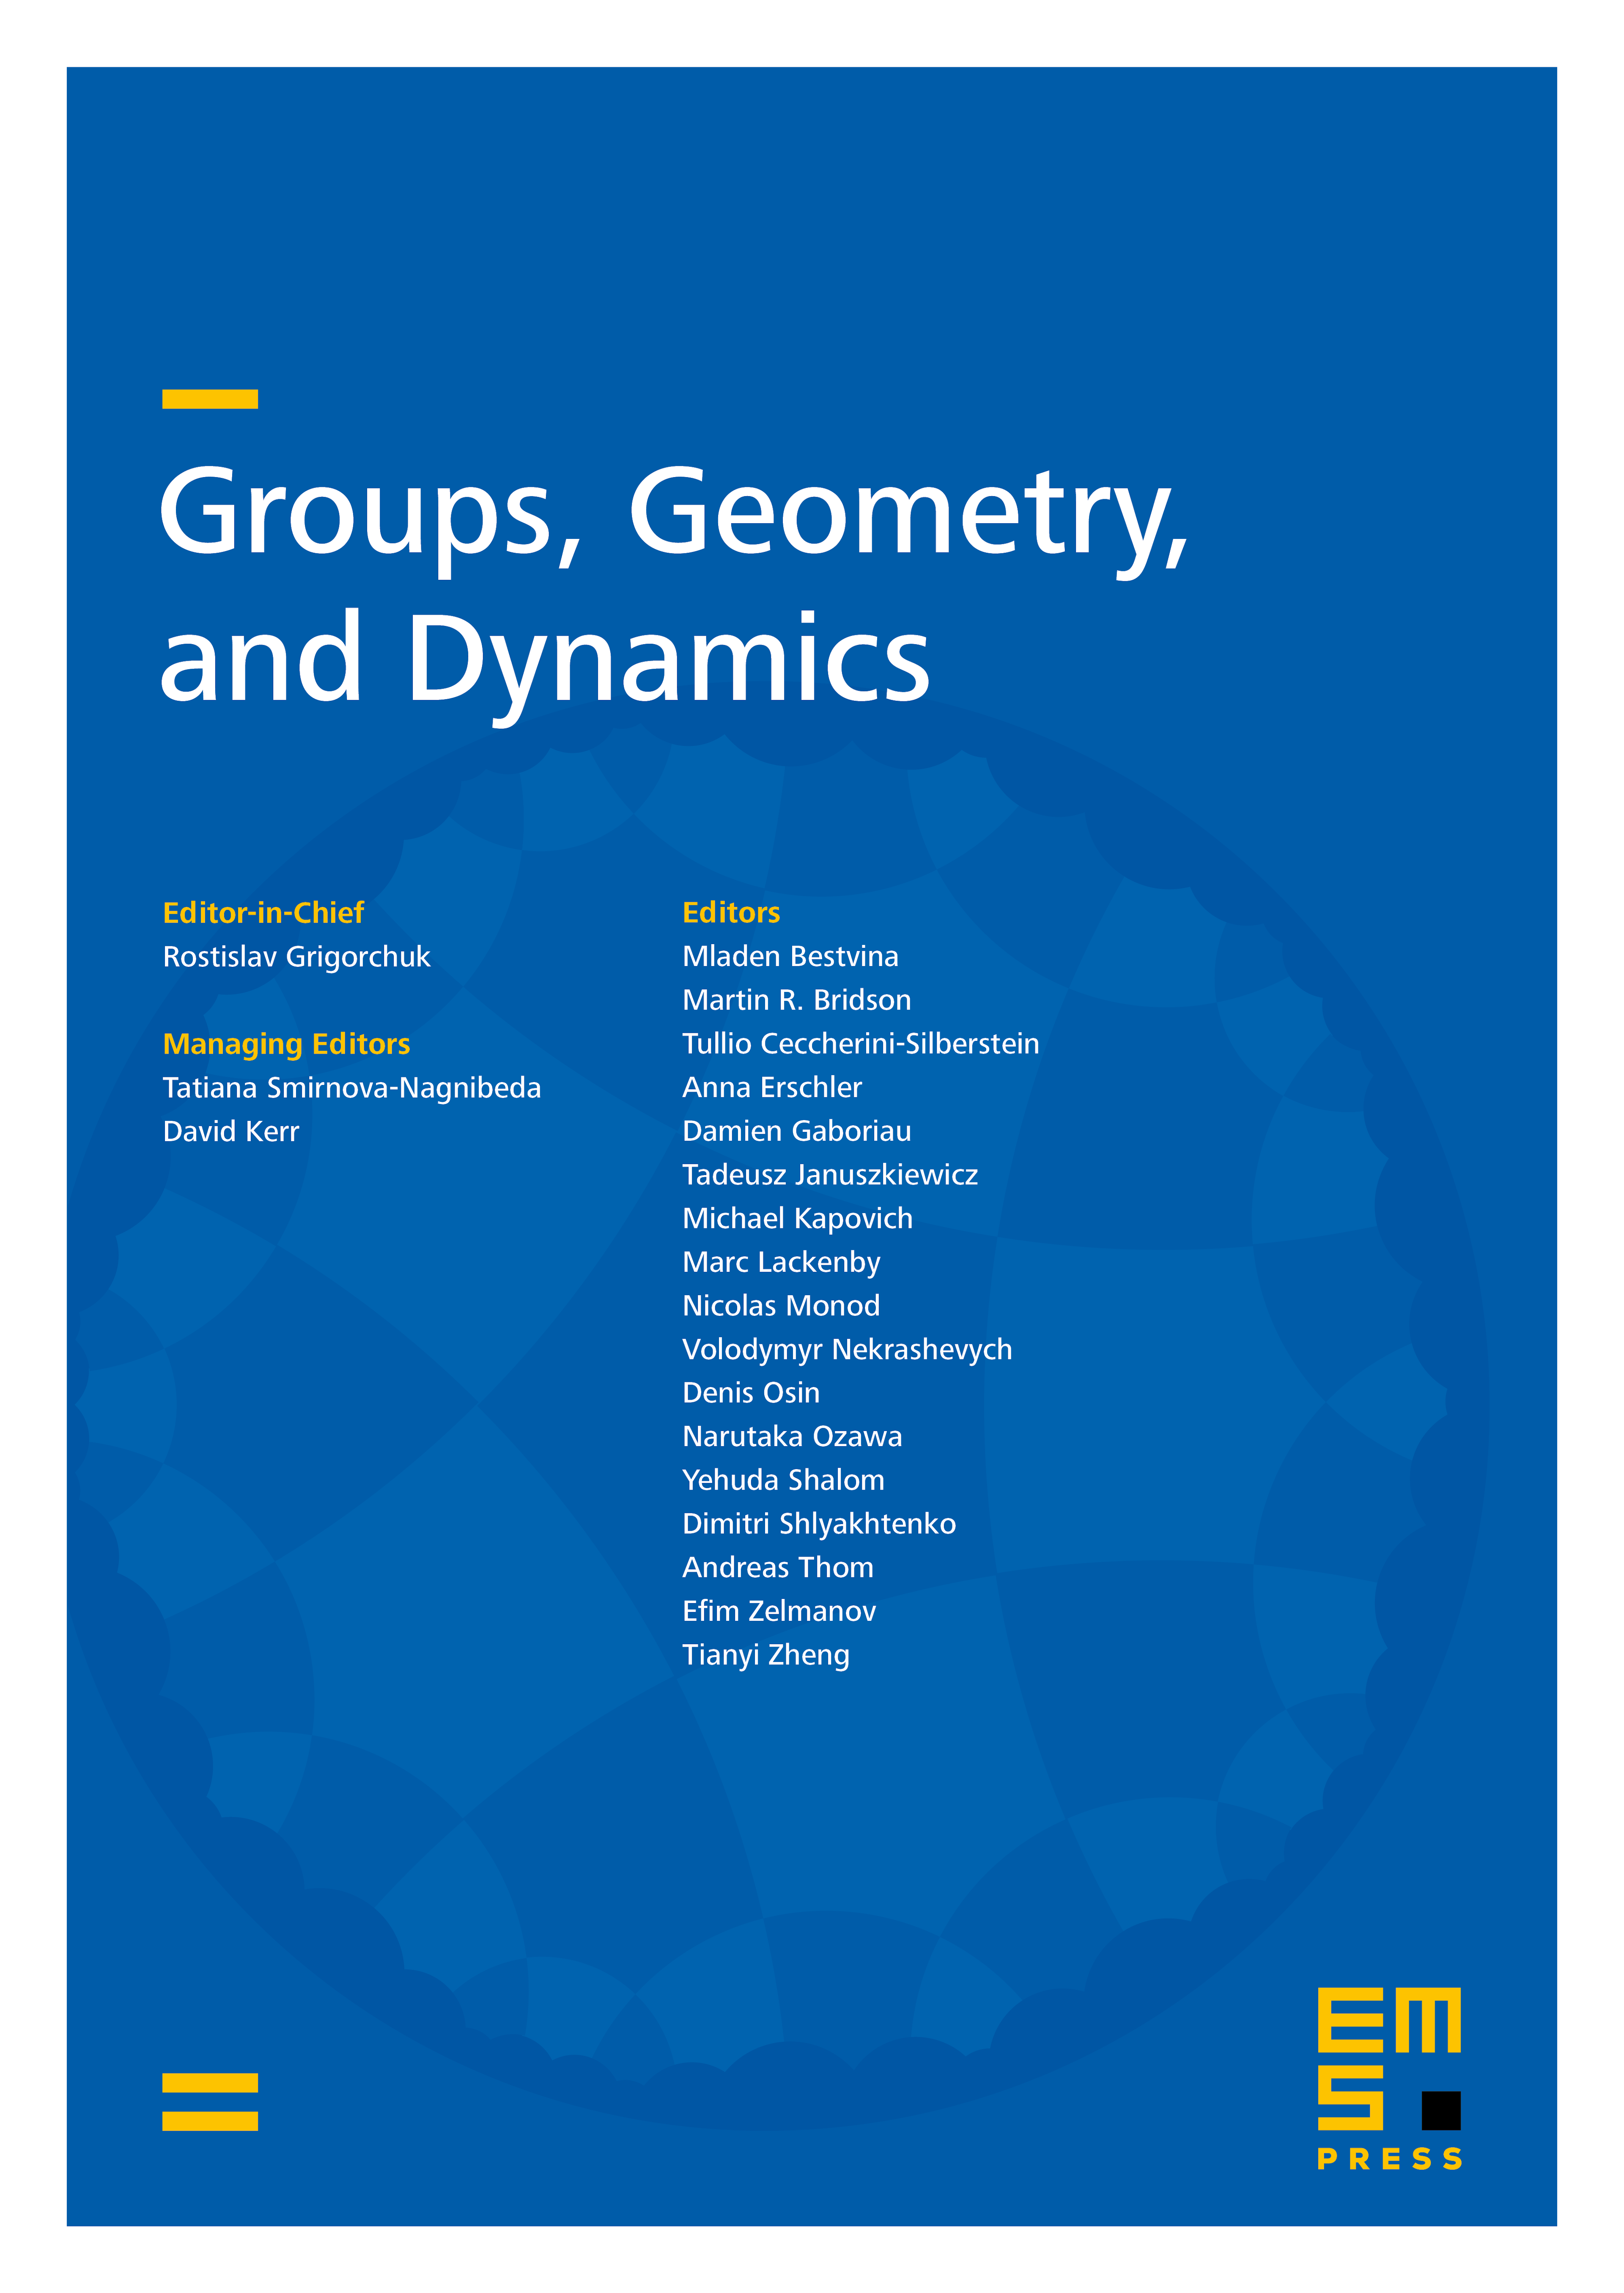 Limits of conjugacy classes under iterates of hyperbolic elements of Out($\mathbb F$) cover